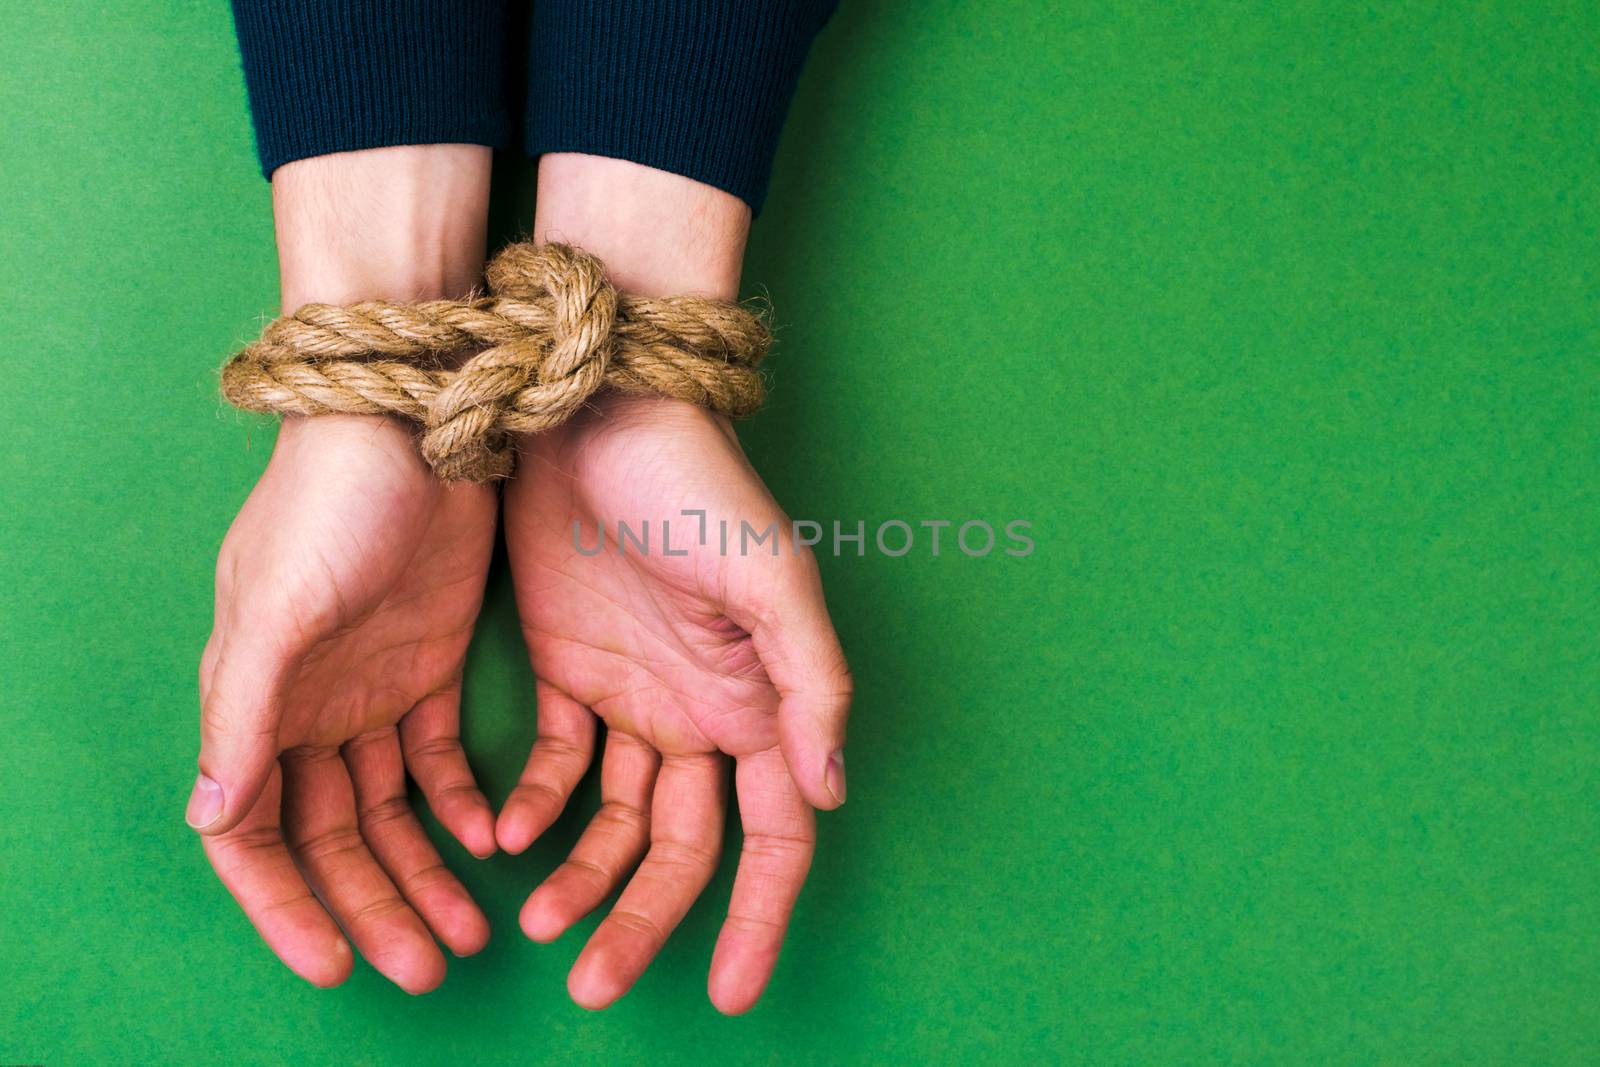 The man with the connected hands against a green background